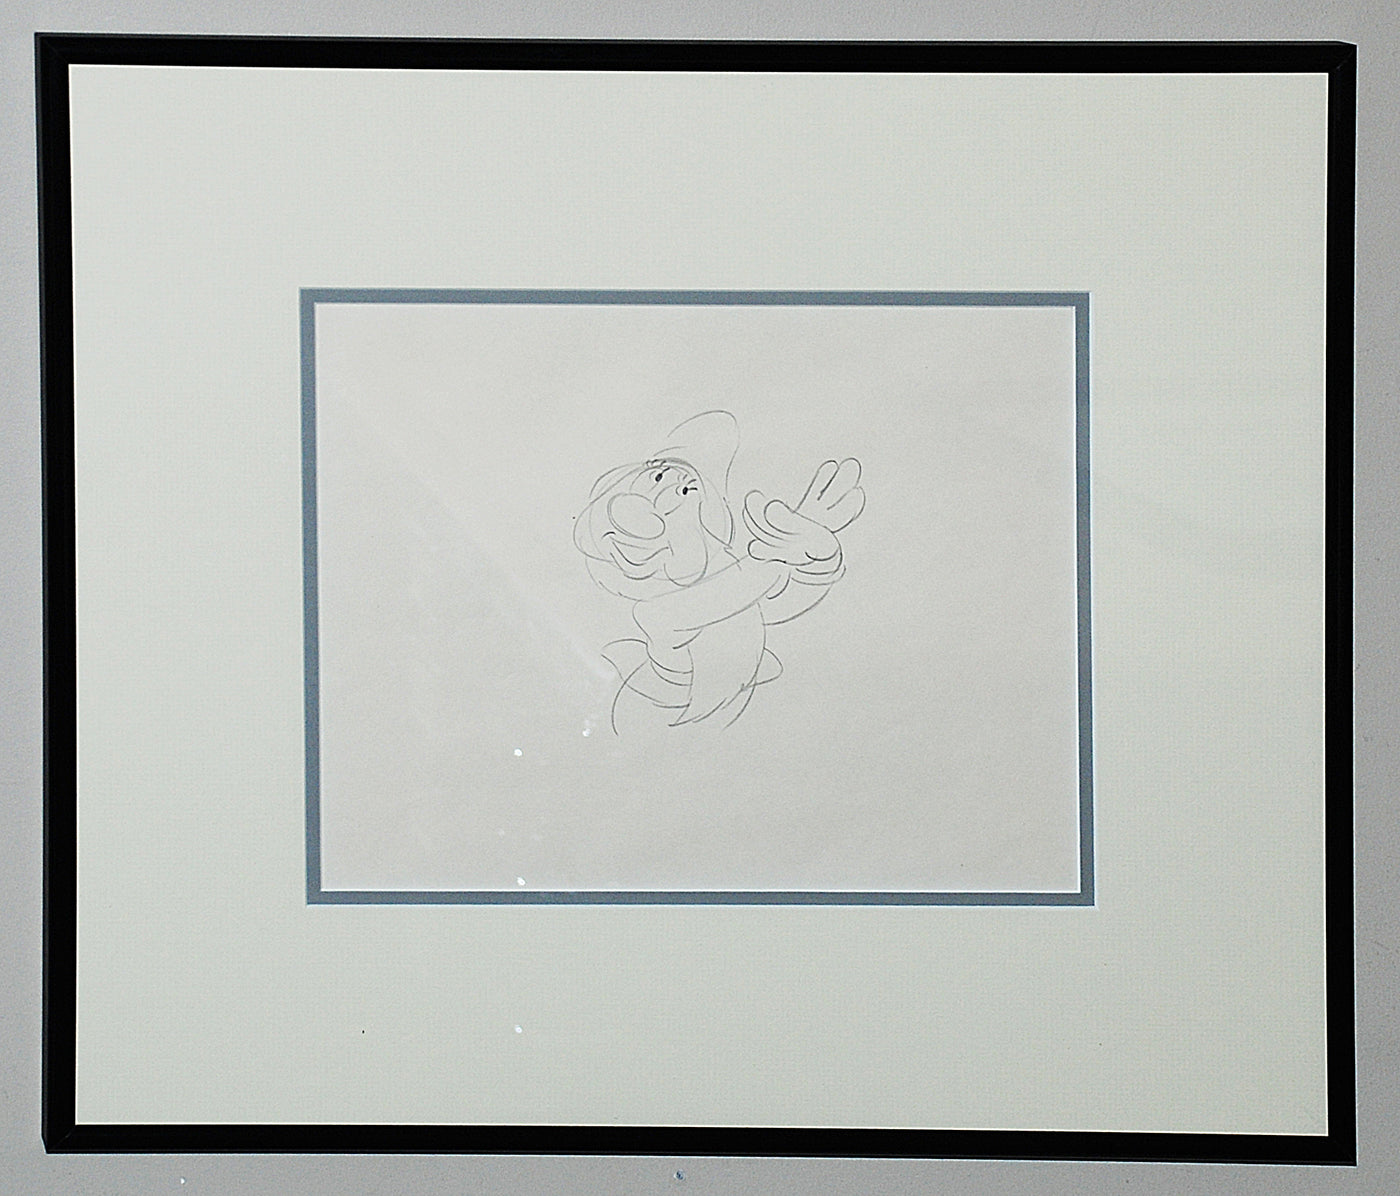 Original Walt Disney Production Drawing featuring Bashful from Snow White and the Seven Dwarfs